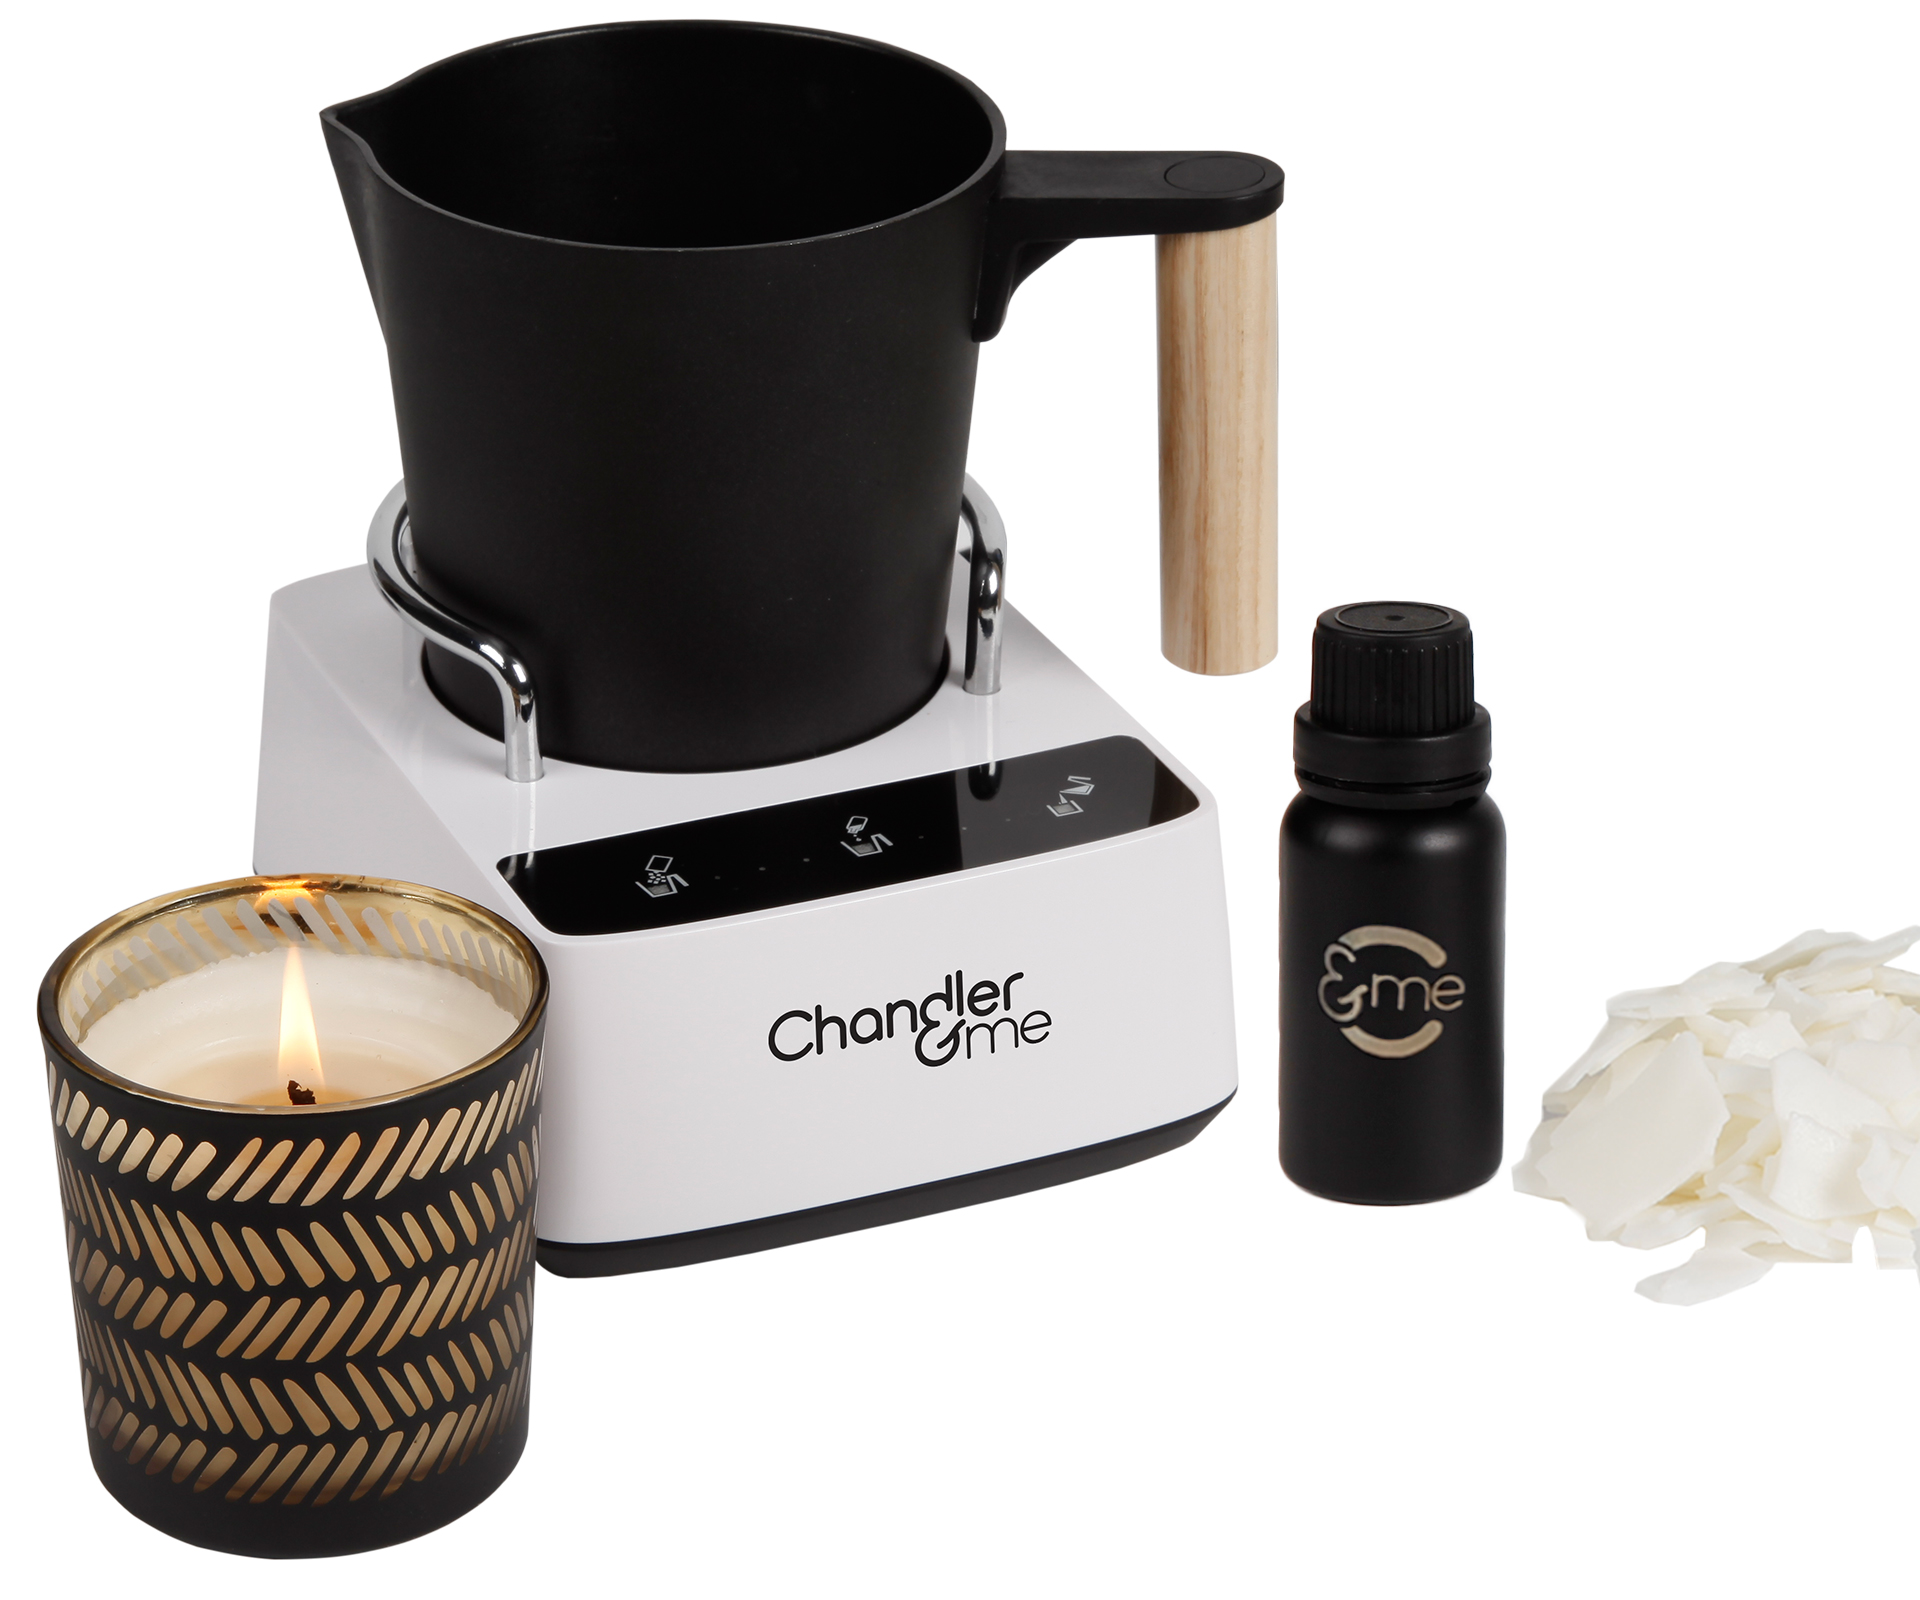 Why the Chandler & Me candle making kit is the ultimate Christmas gift